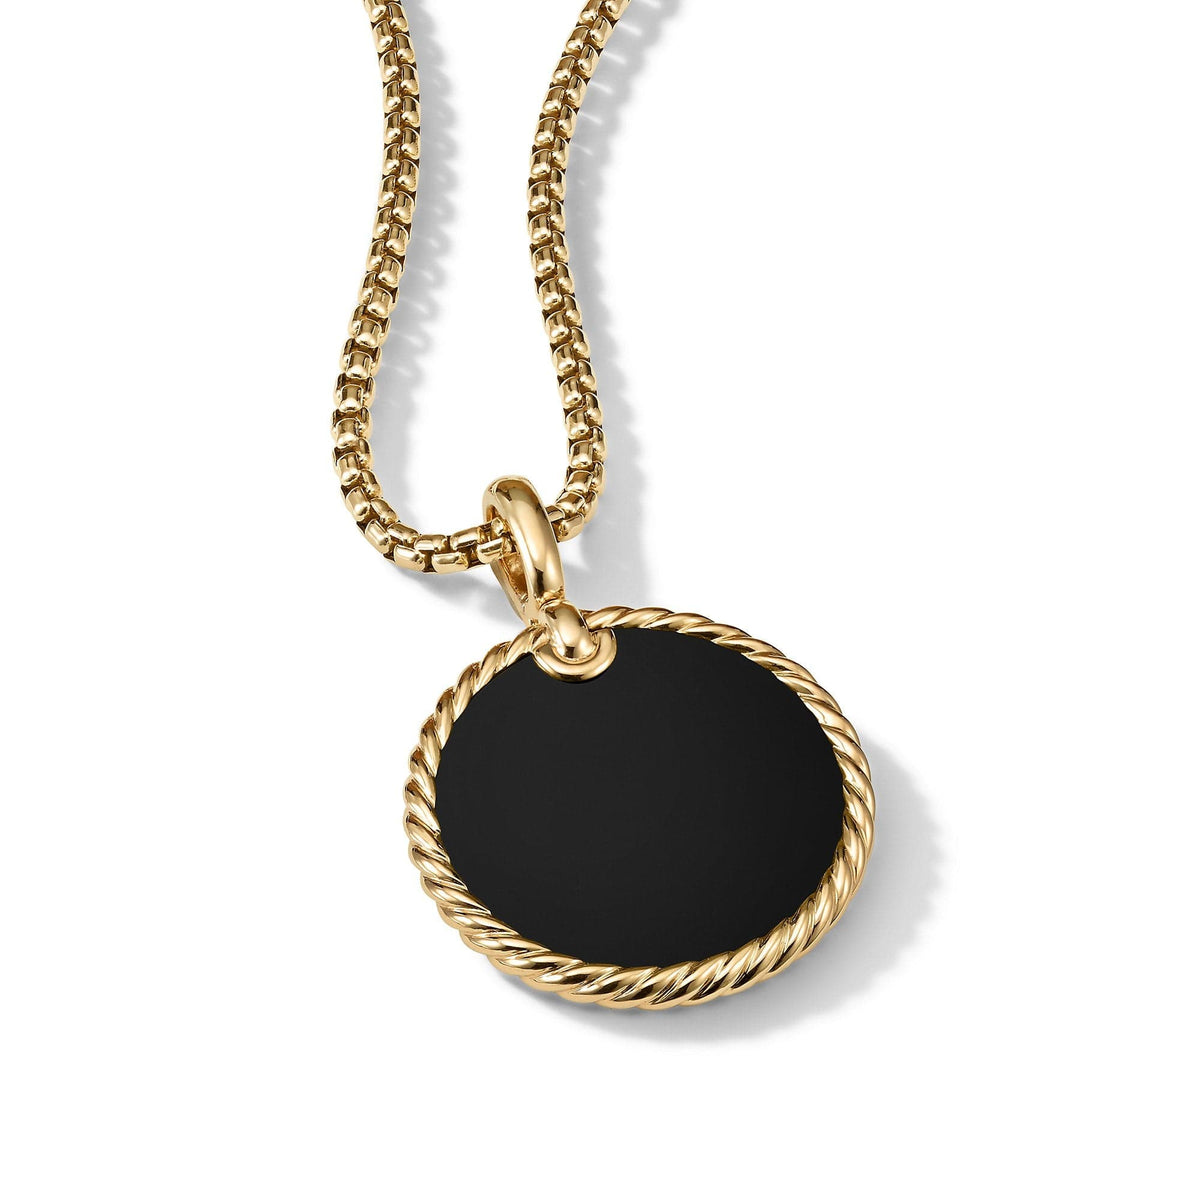 DY Elements Disc Pendant in 18K Yellow Gold with Black Onyx and Mother of Pearl